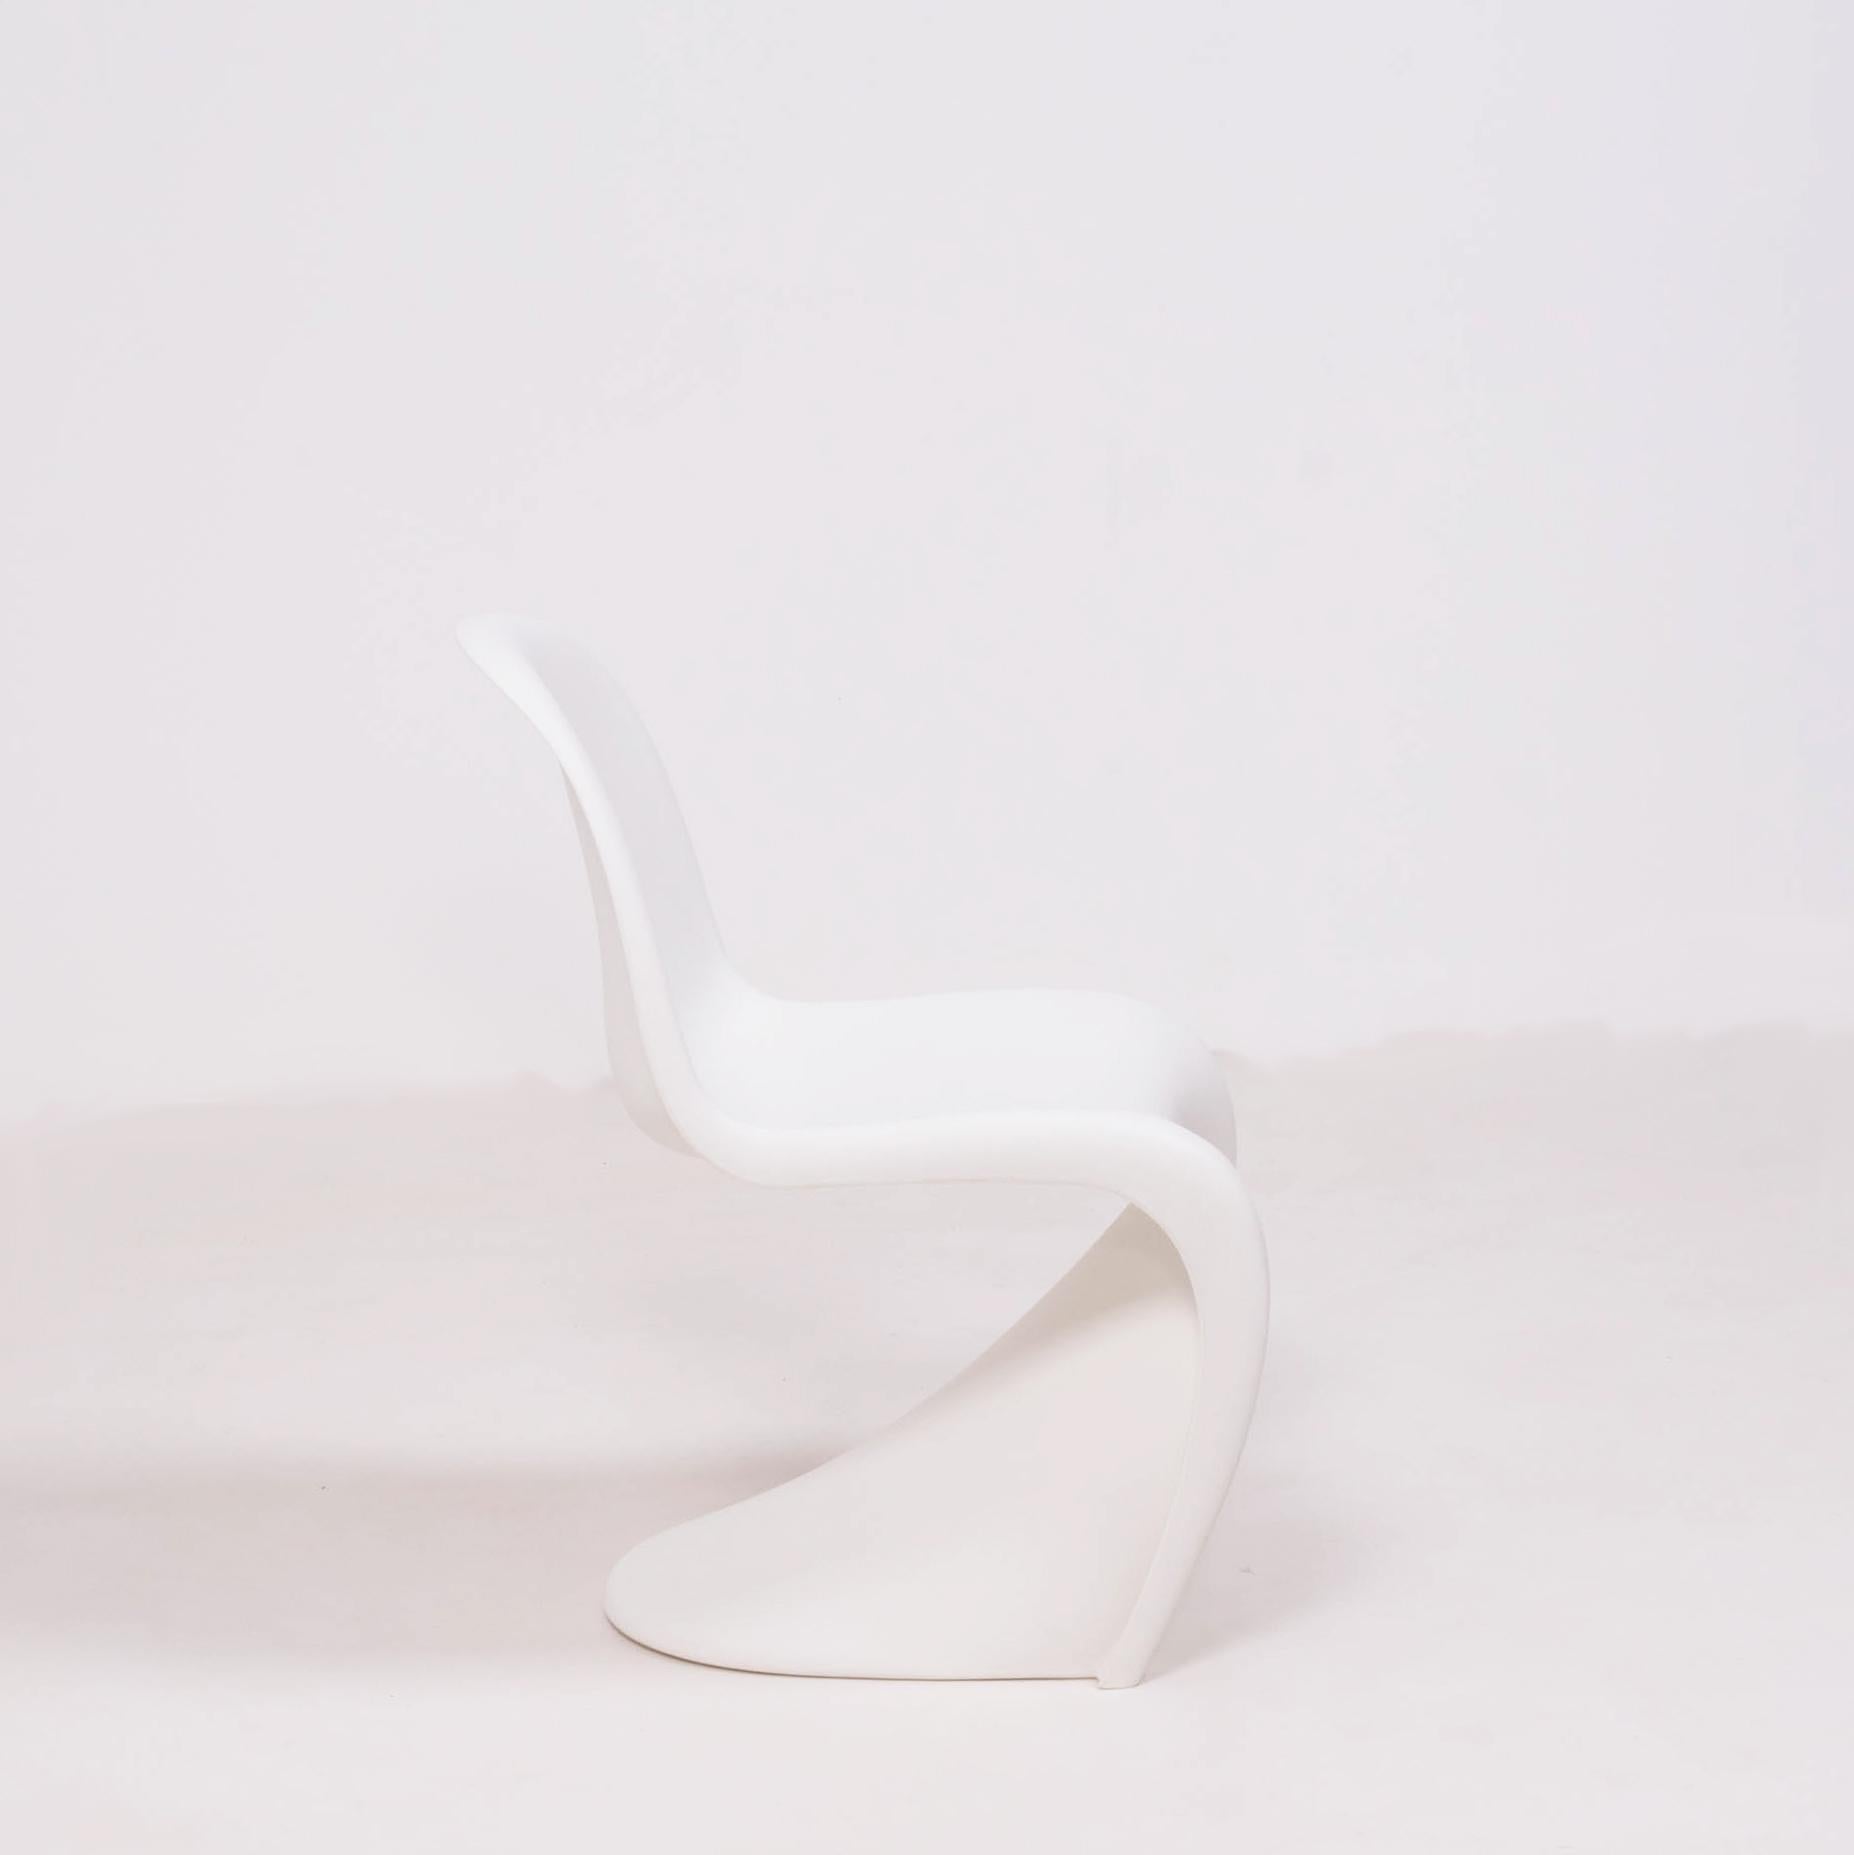 Swiss Mid Century Modern White Panton Chairs by Verner Panton for Vitra